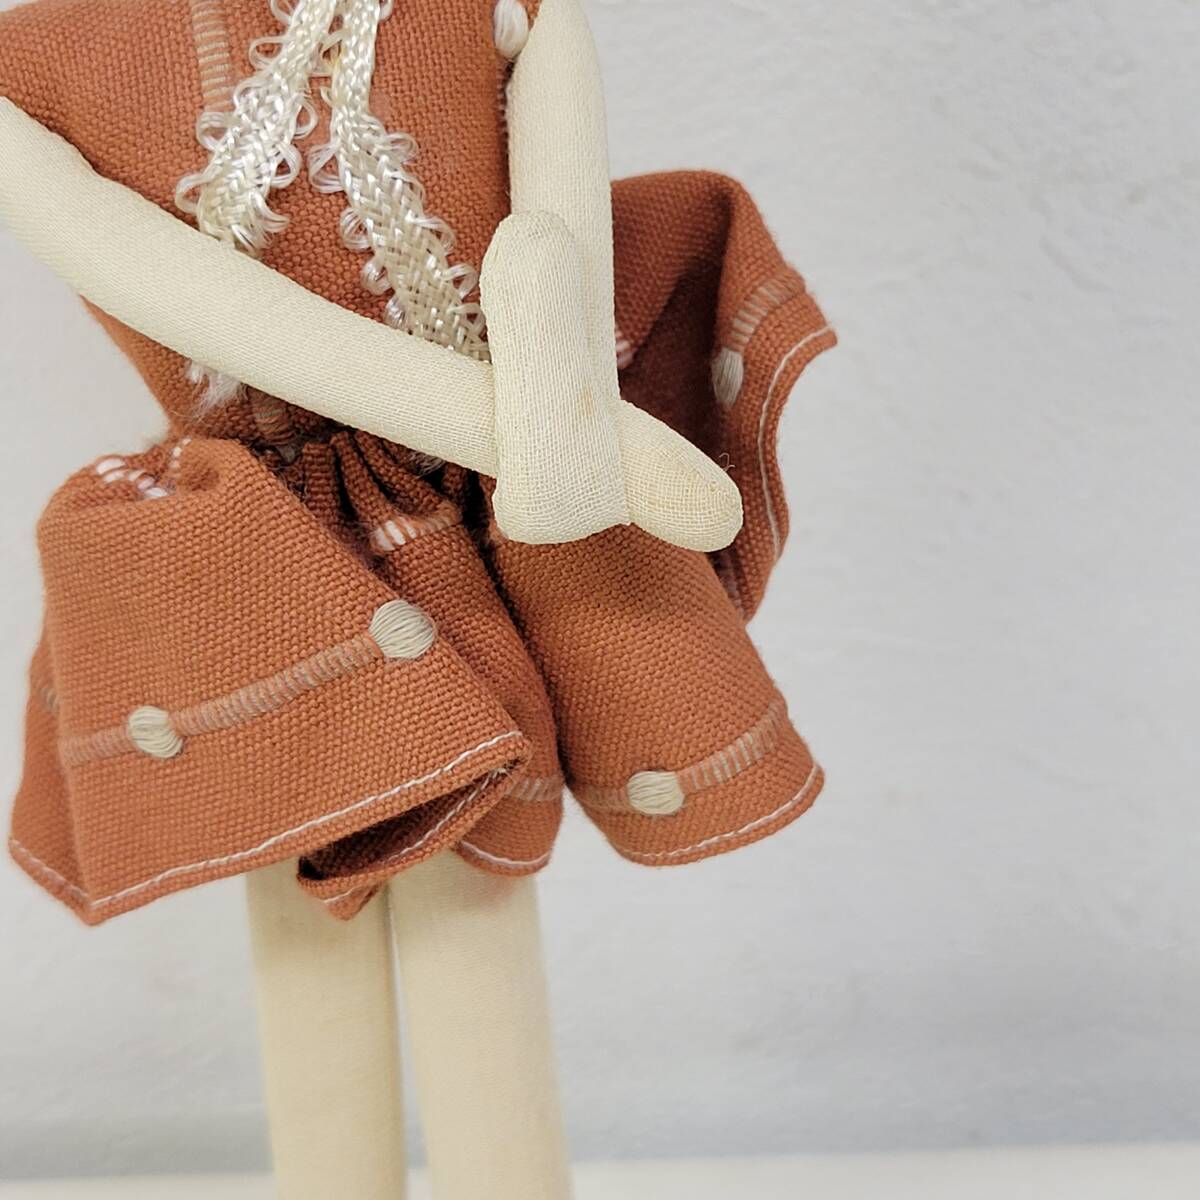 0515-211* Showa Retro Poe z doll details unknown doll ornament interior cloth doll girl dirt have present condition goods 